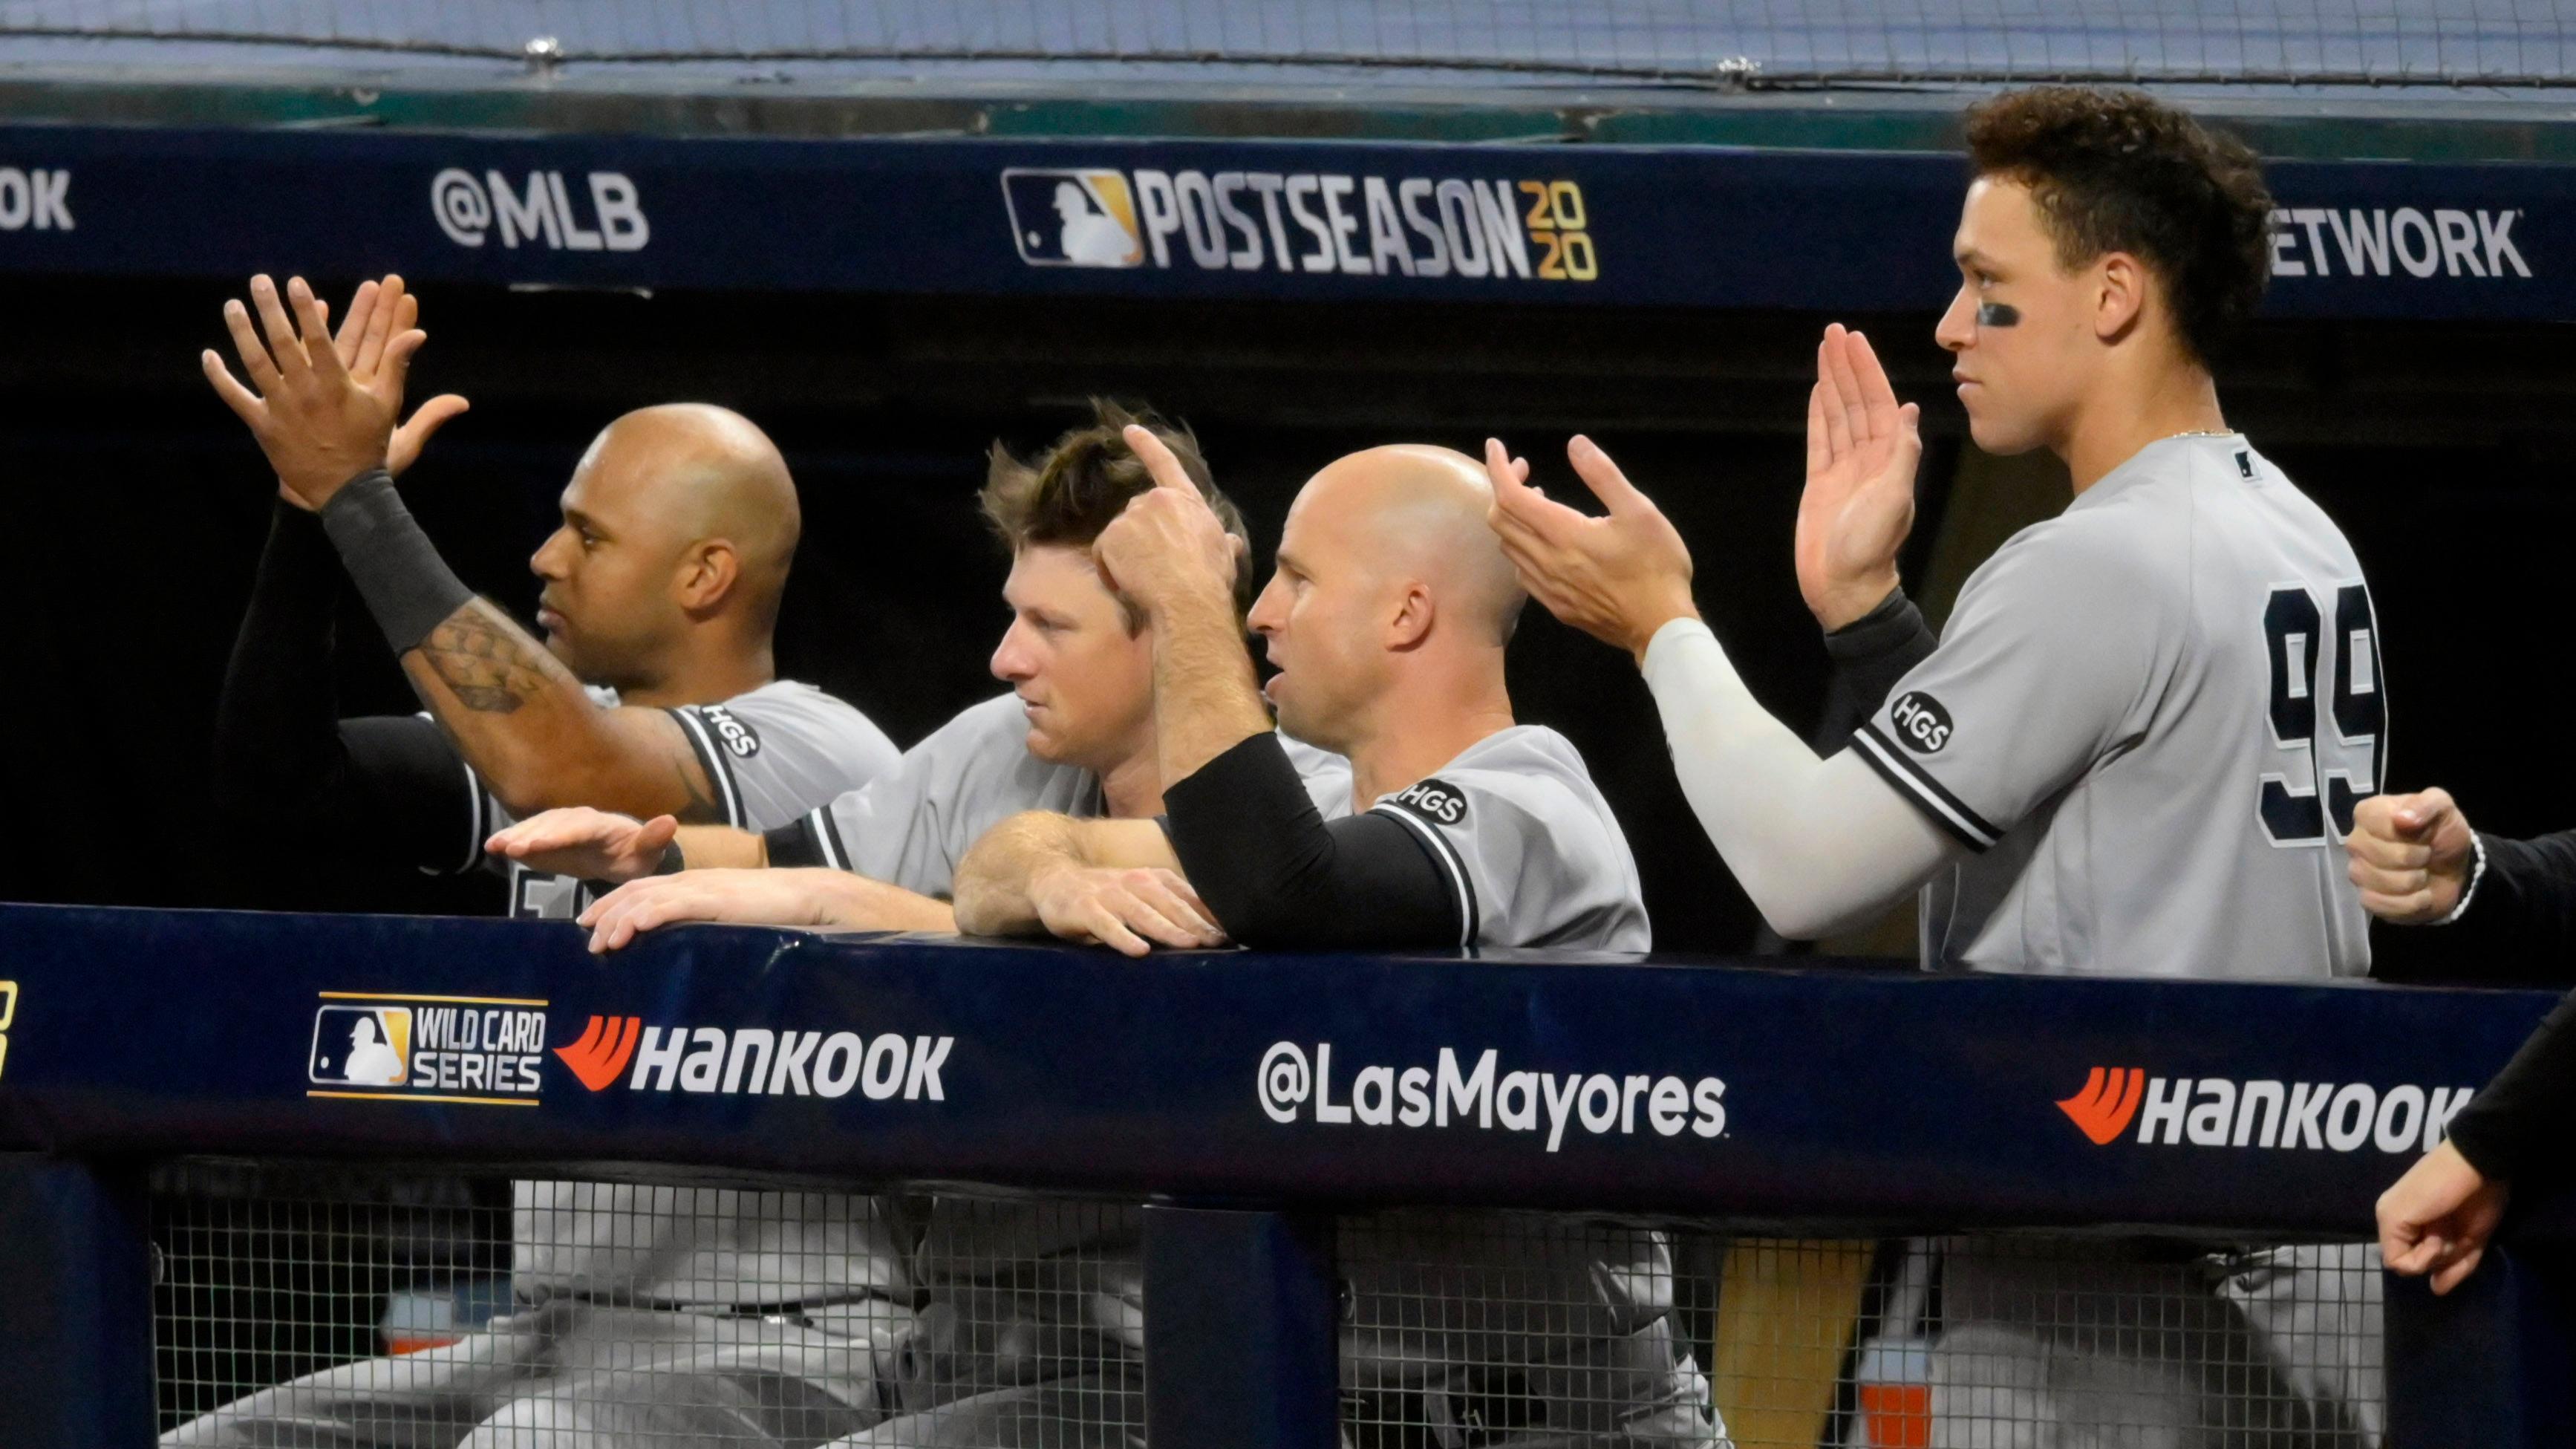 Yankees cheer from dugout during Game 1 victory / USA TODAY